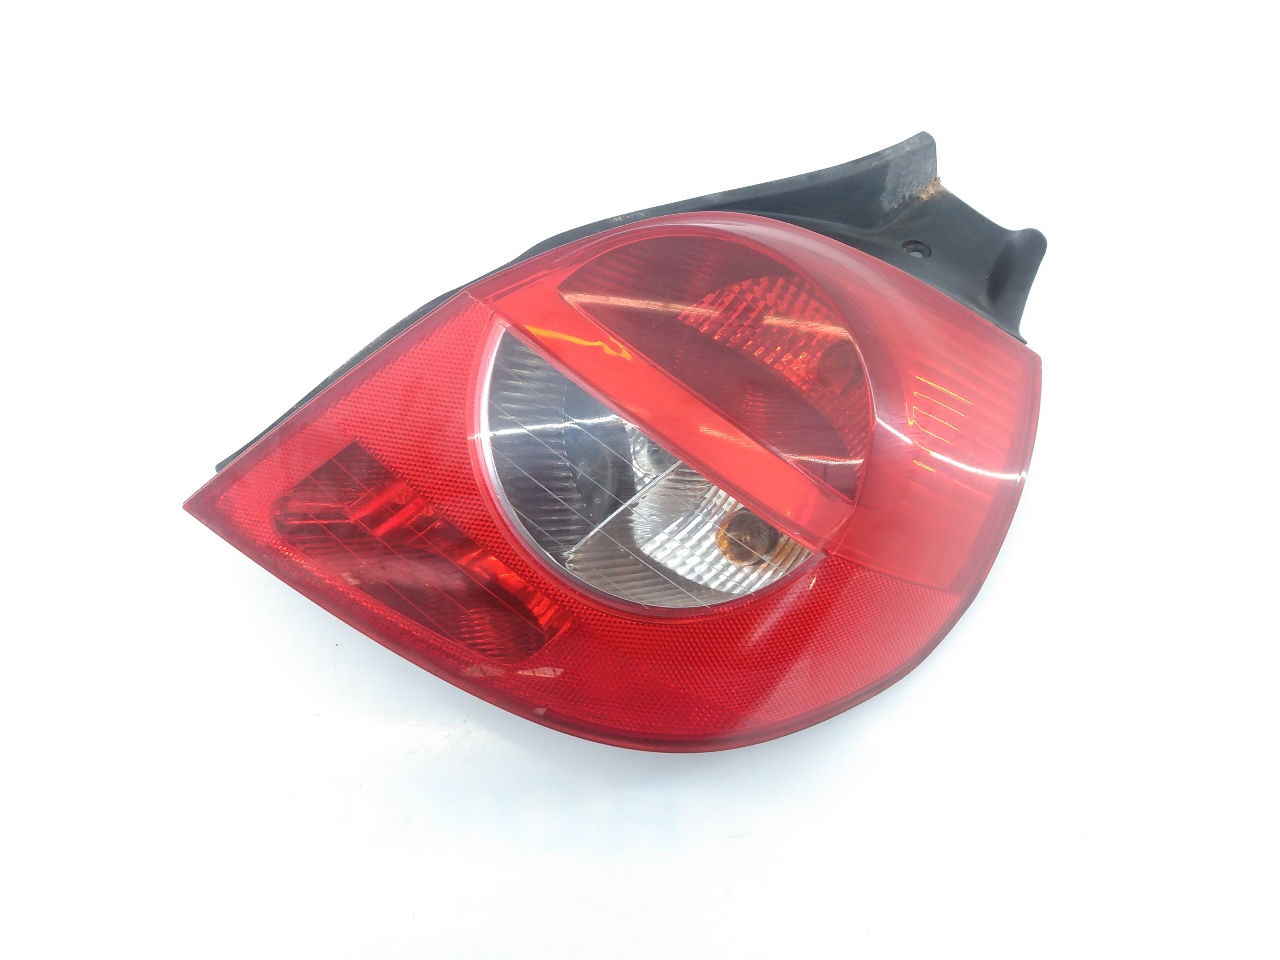 RENAULT Clio 2 generation (1998-2013) Rear Right Taillight Lamp 89035080, E1-A1-39-2 20954006